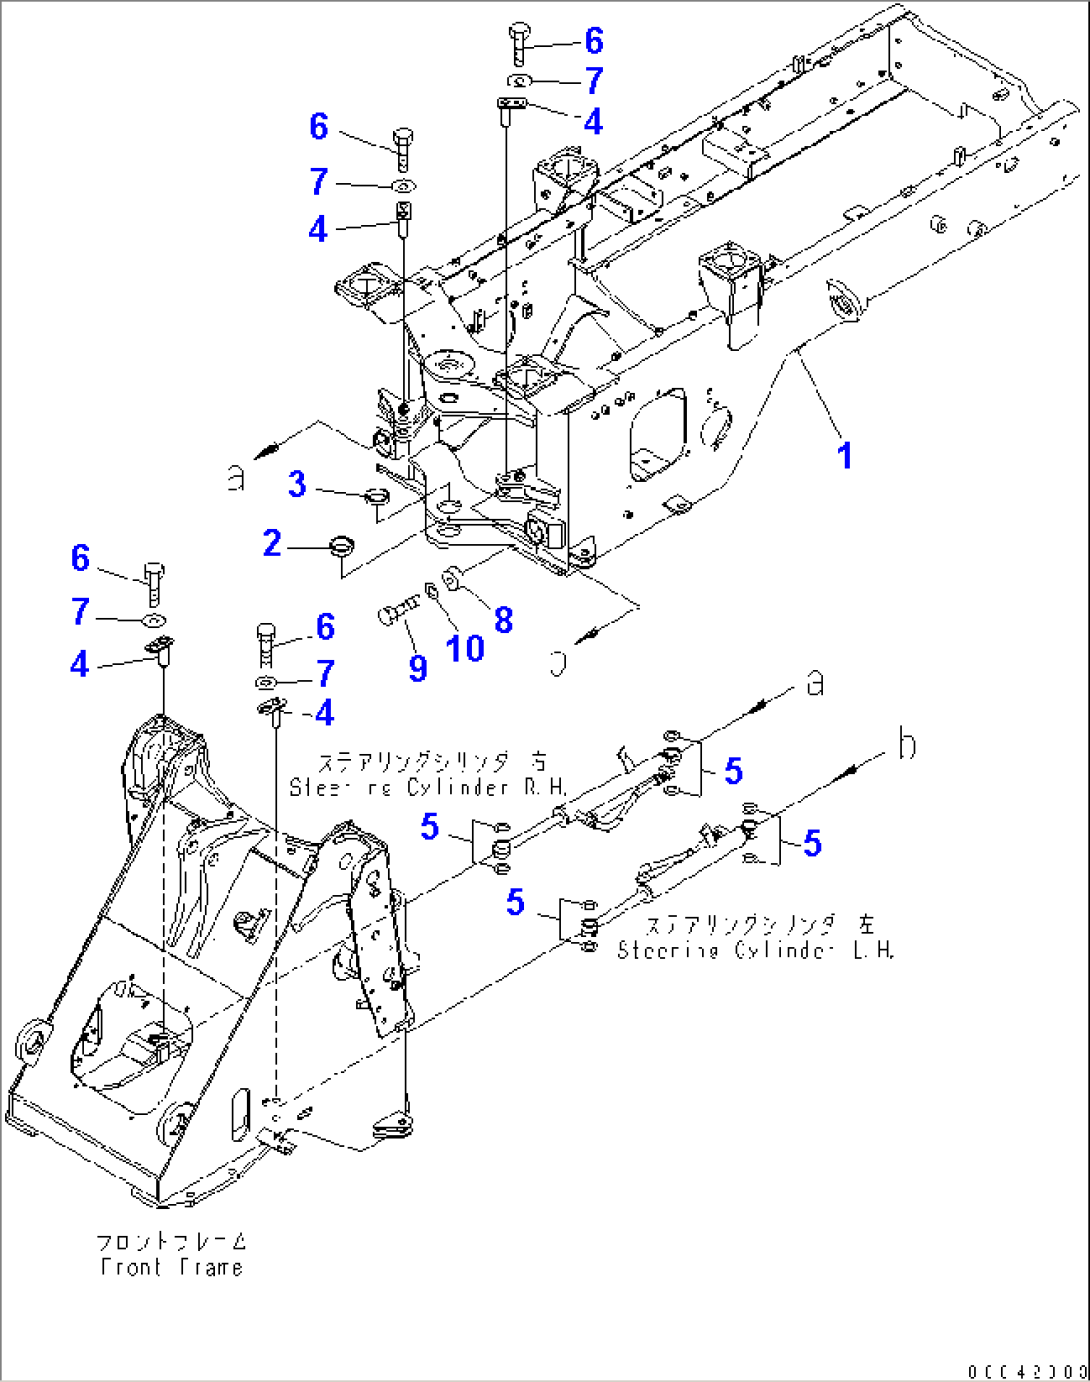 REAR FRAME (FOR BATTERY DISCONNECT SWITCH)